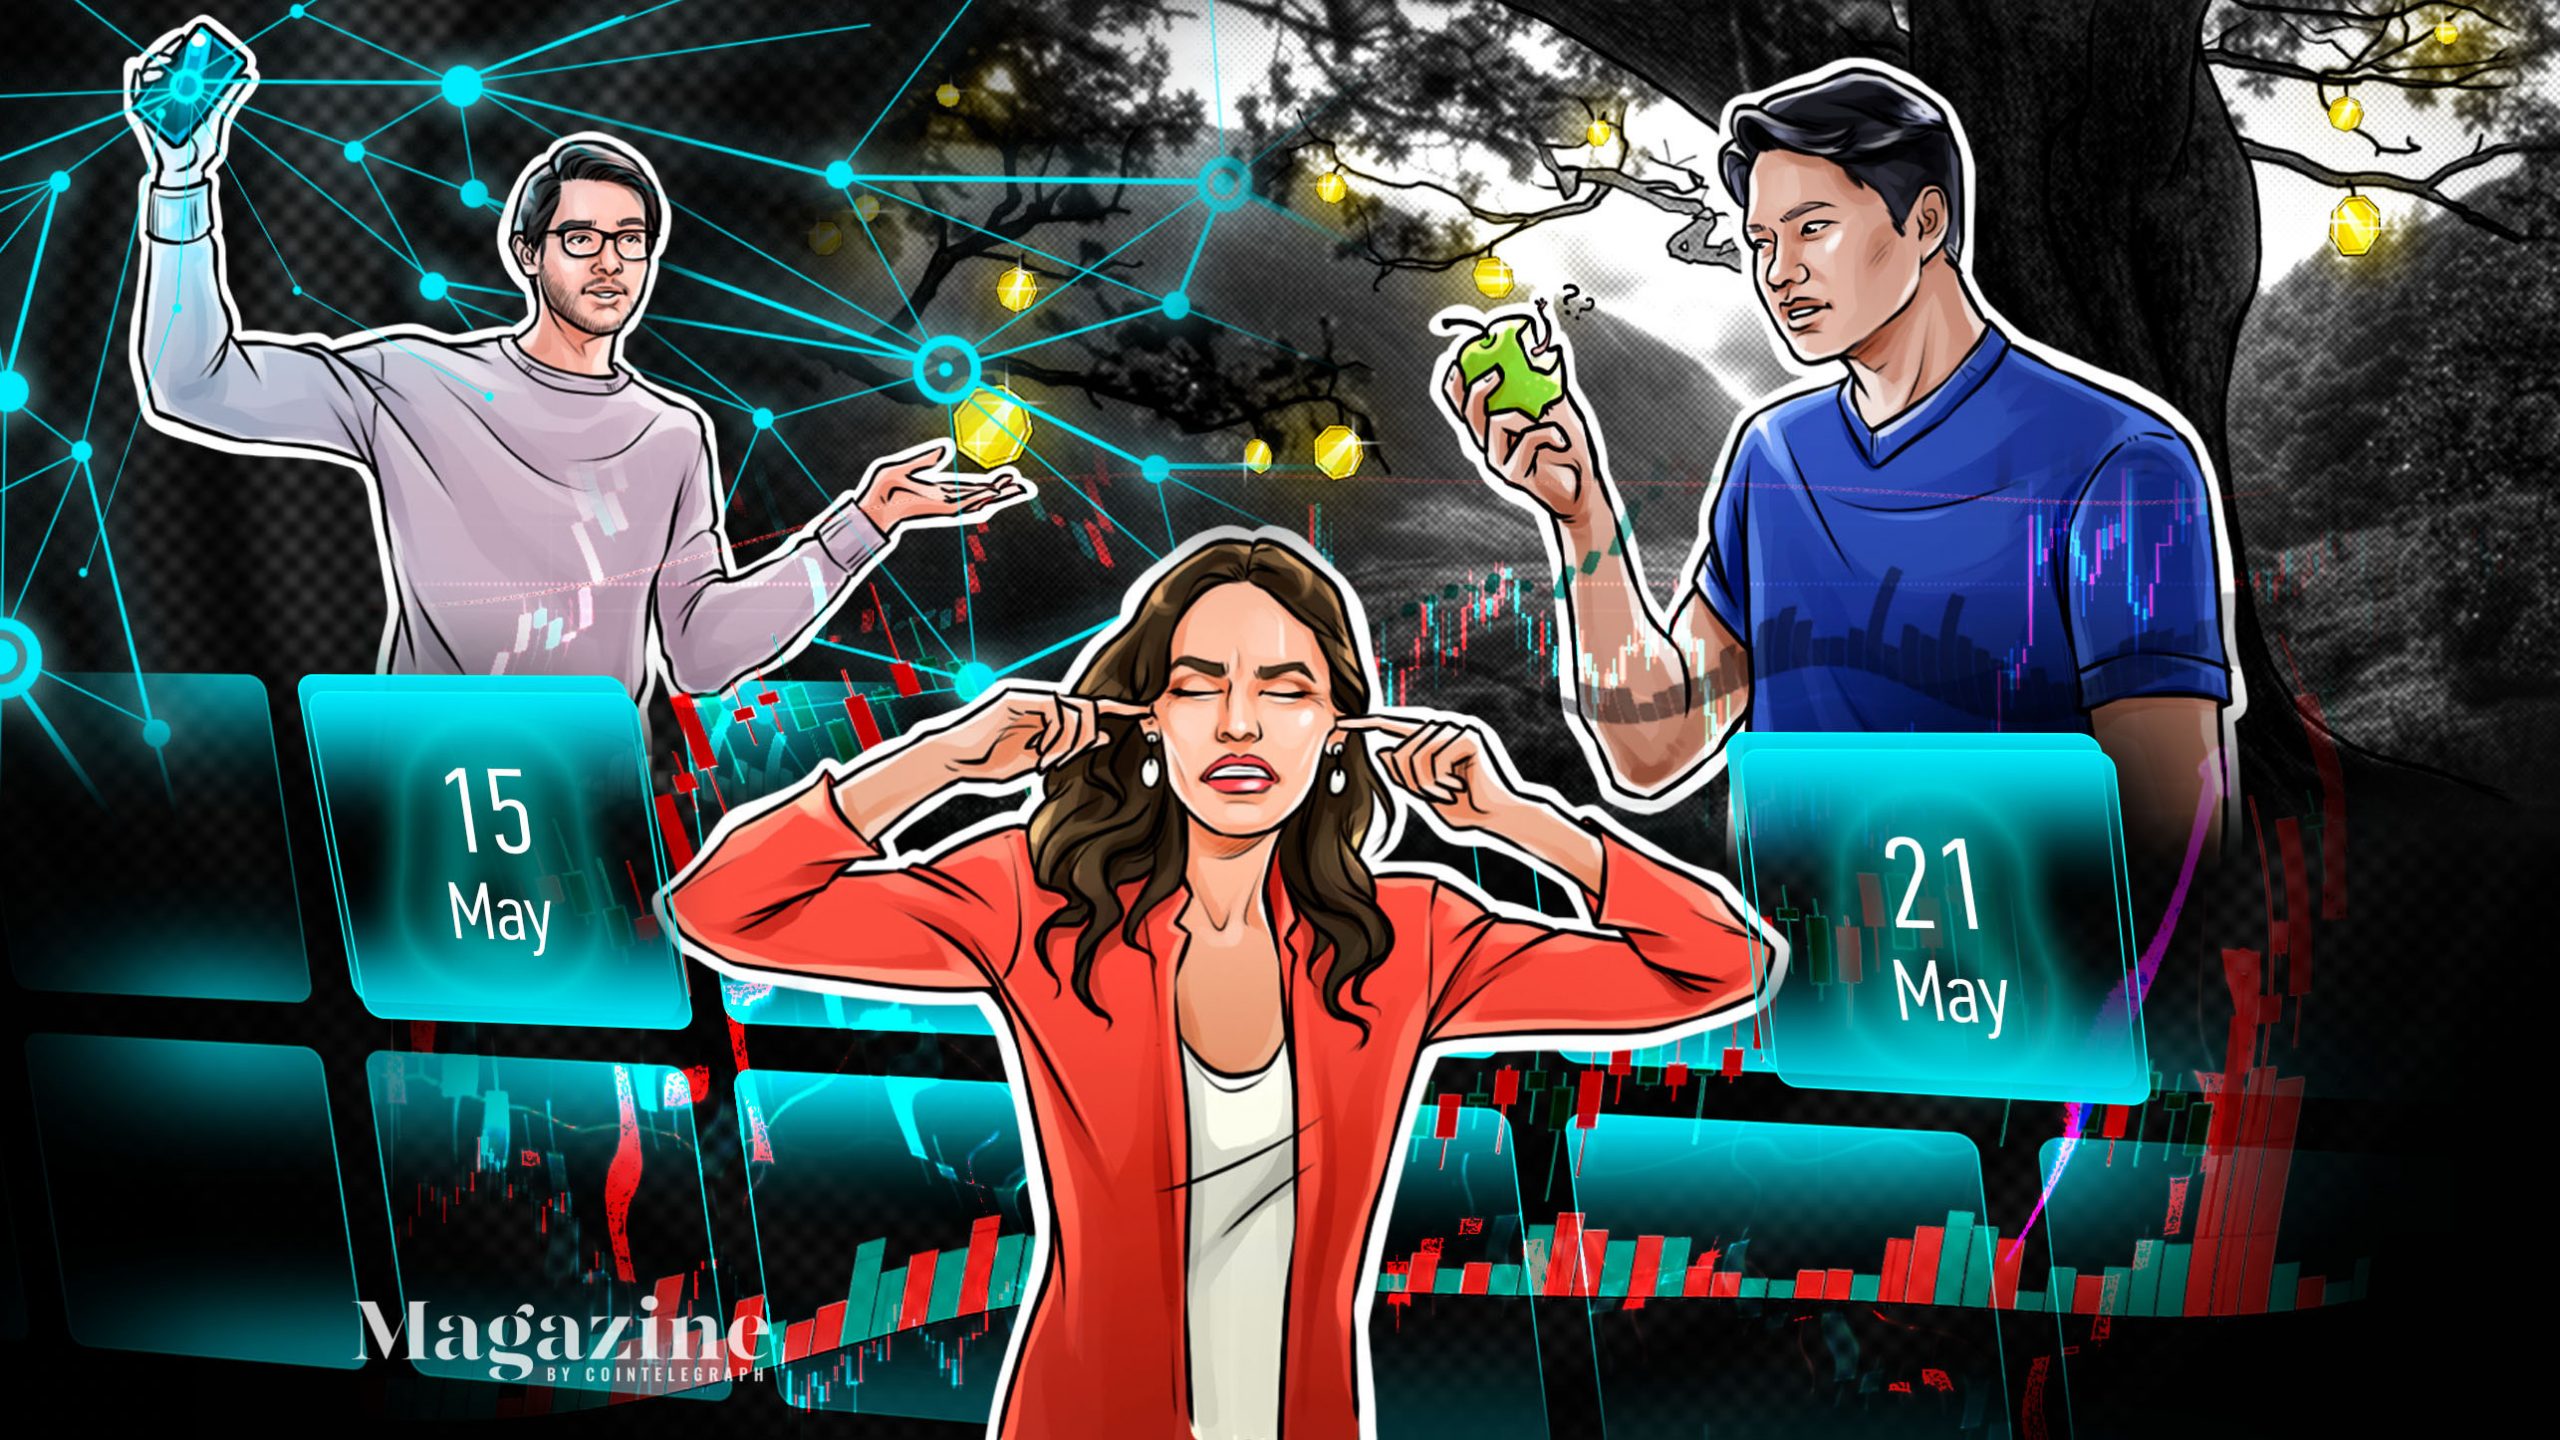 Do Kwon faces legal troubles in Korea, China remains a top contributor to Bitcoin mining, and Ethereum eyes ‘huge testing milestone’ ahead of merge: Hodler’s Digest, May 15-21